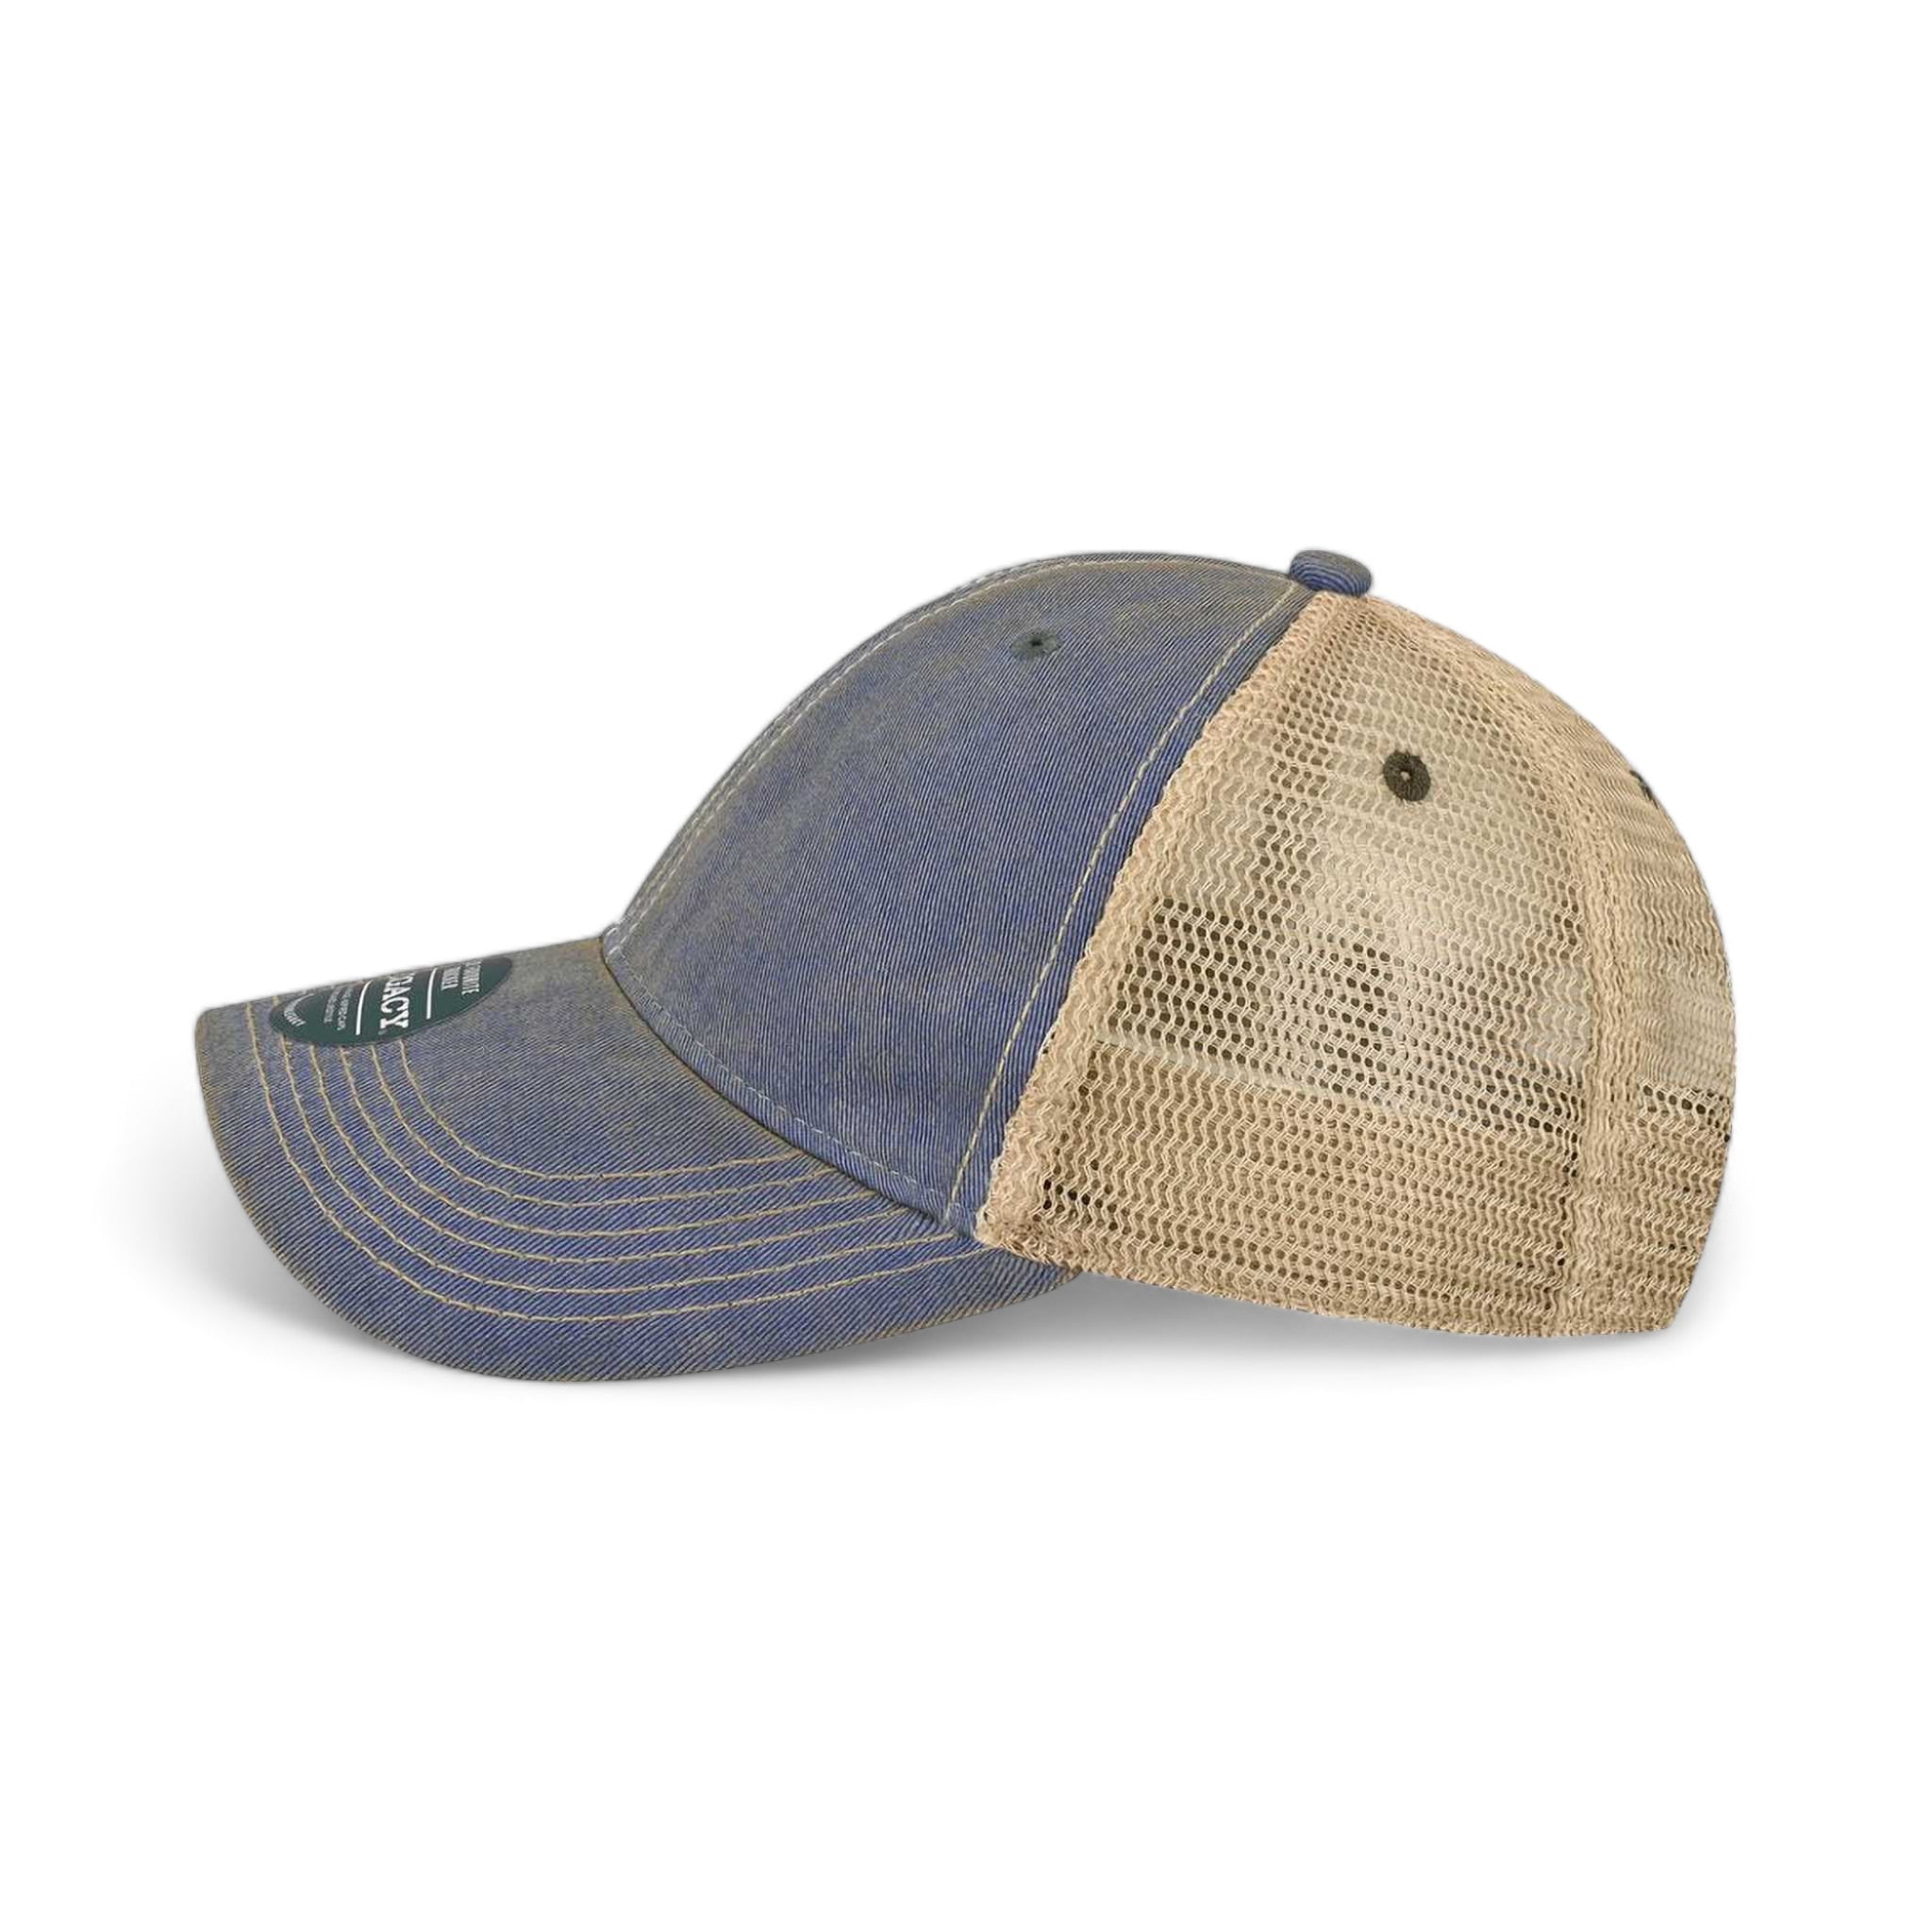 Side view of LEGACY OFAY custom hat in royal and khaki